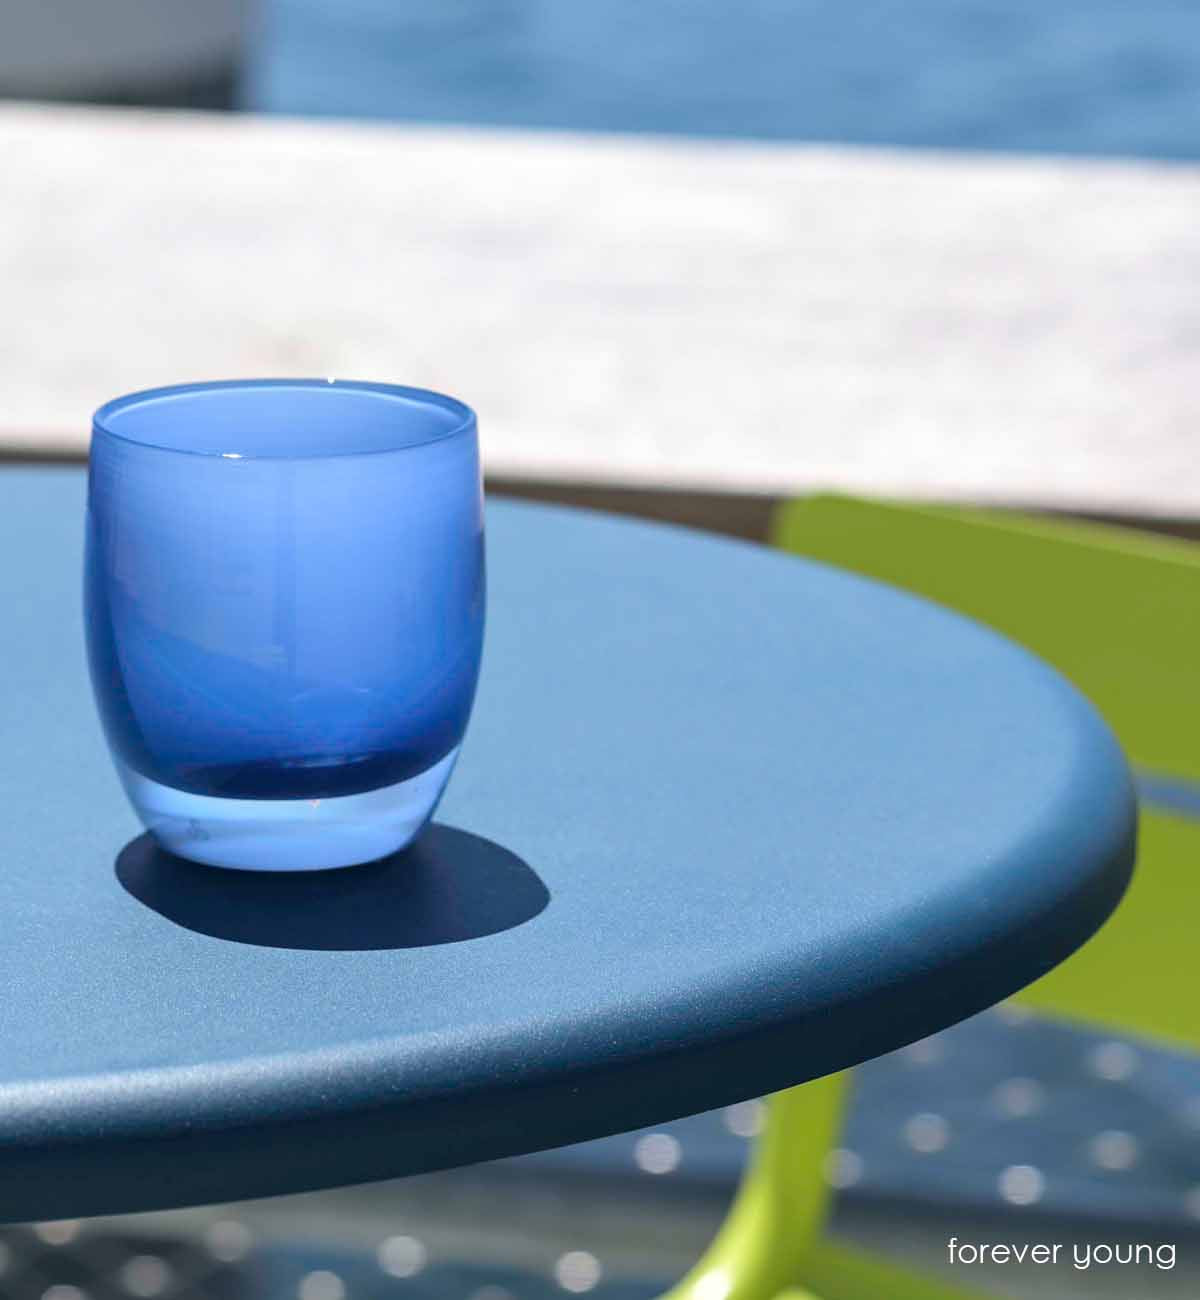 forever young blue hand-blown glass votive candle holder, sunbathing on a table beside a lime green chair, near the water.